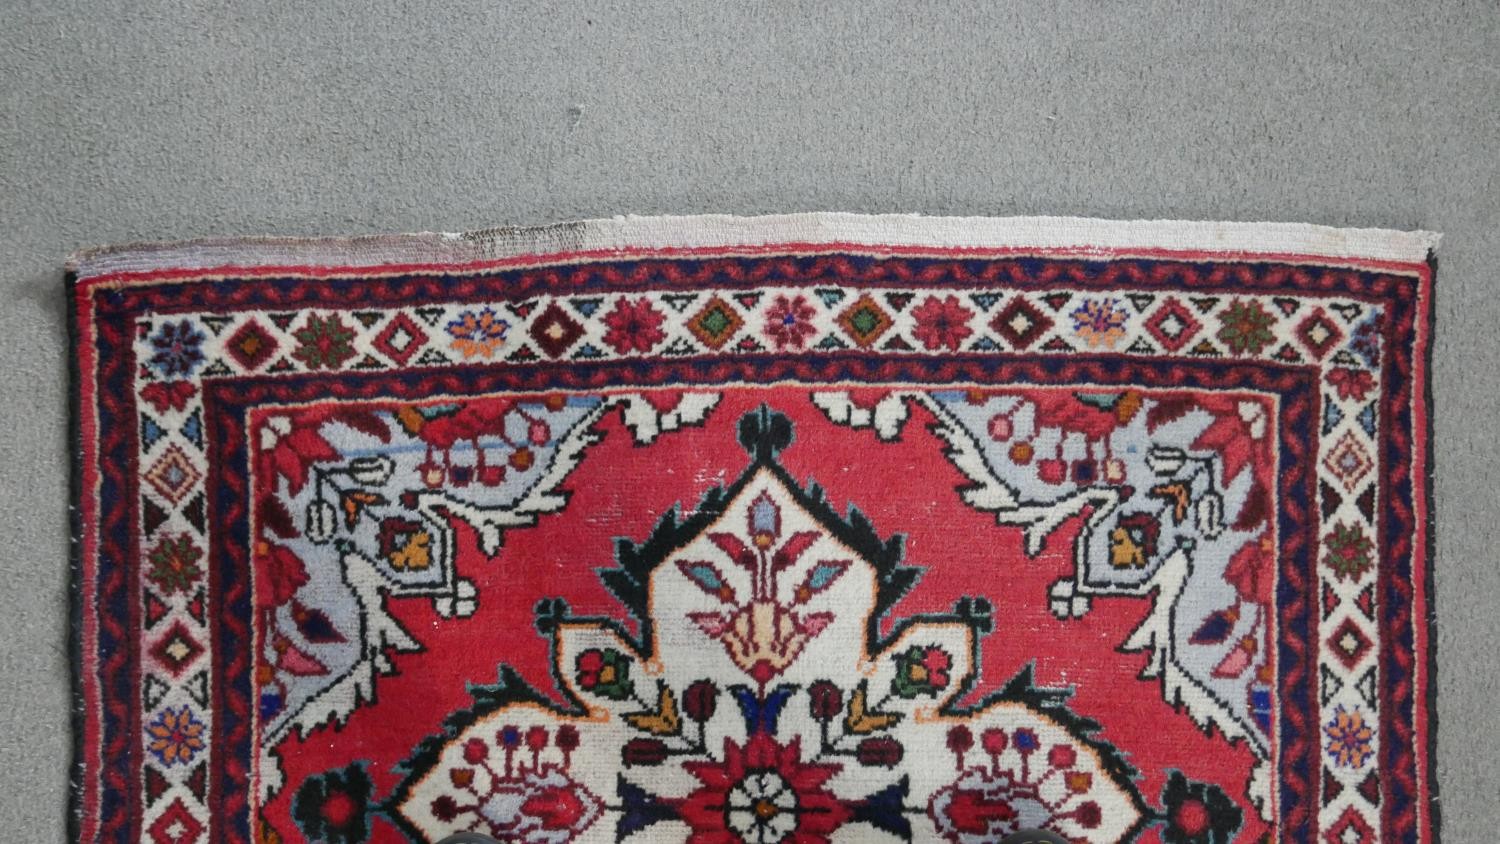 A handmade Persian Hamadan rug with repeating floral motifs across the madder ground within - Image 5 of 7